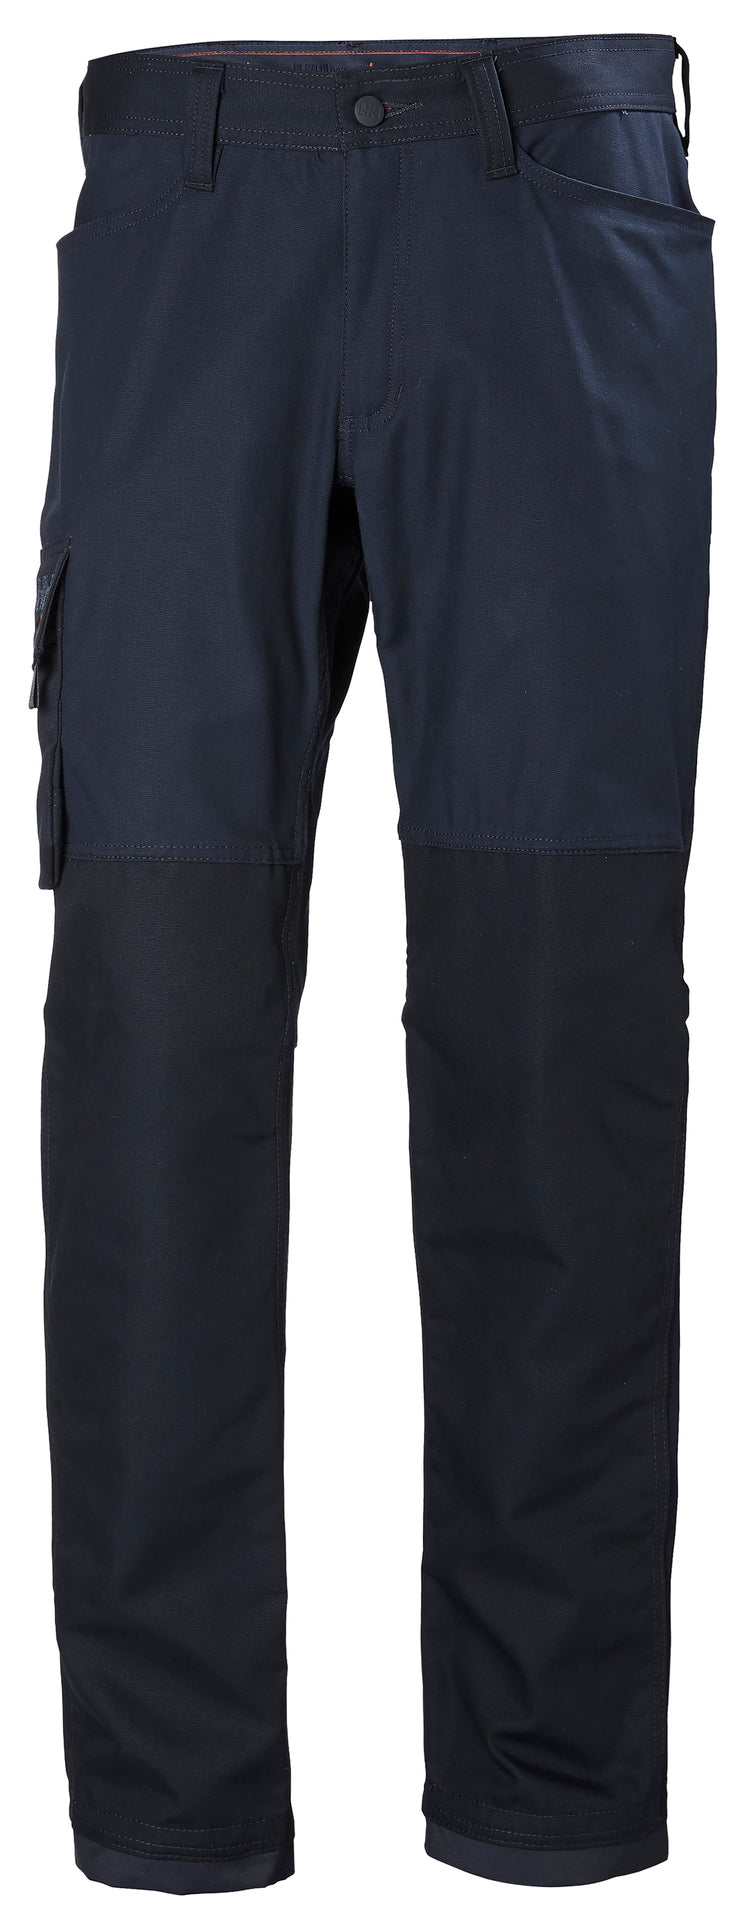 Helly Hansen Oxford Service Trousers - Navy